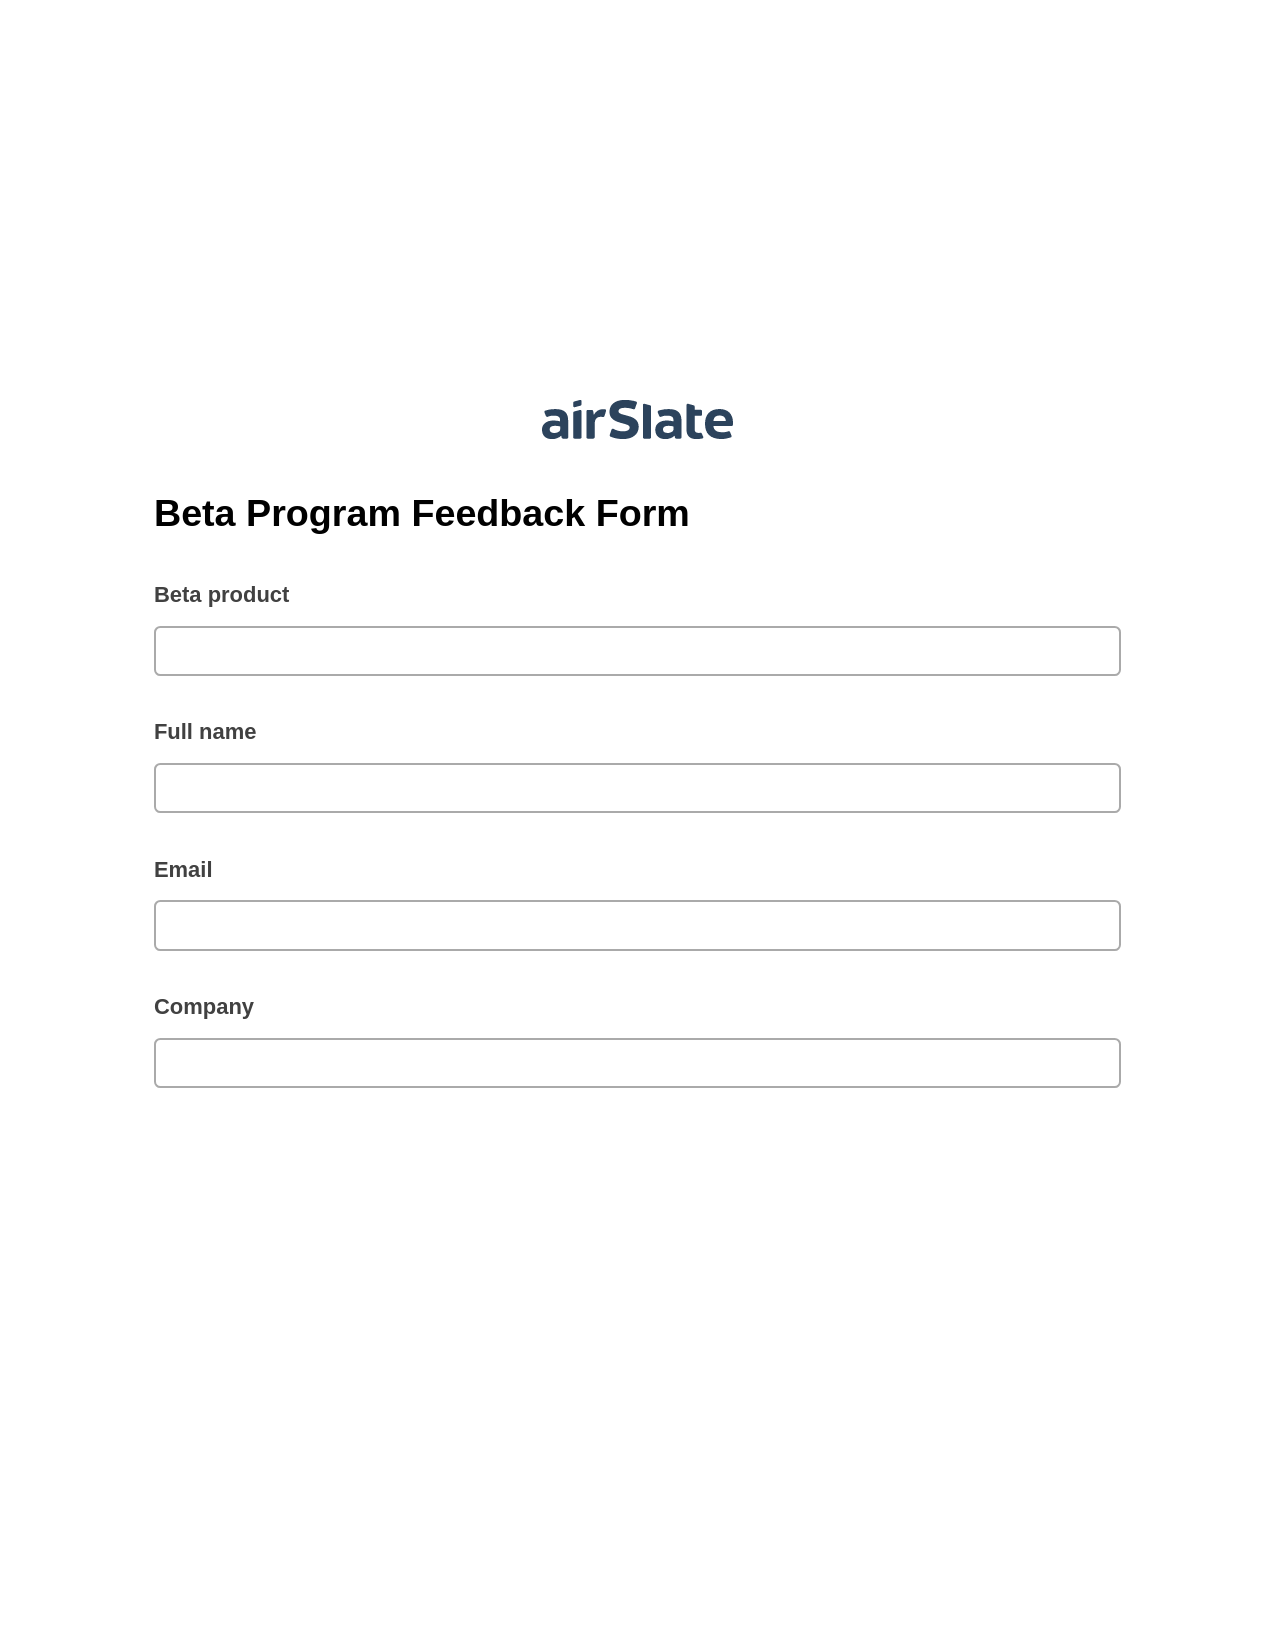 Beta Program Feedback Form Pre-fill from CSV File Bot, Send a Slate to MS Dynamics 365 Contact Bot, Export to Google Sheet Bot